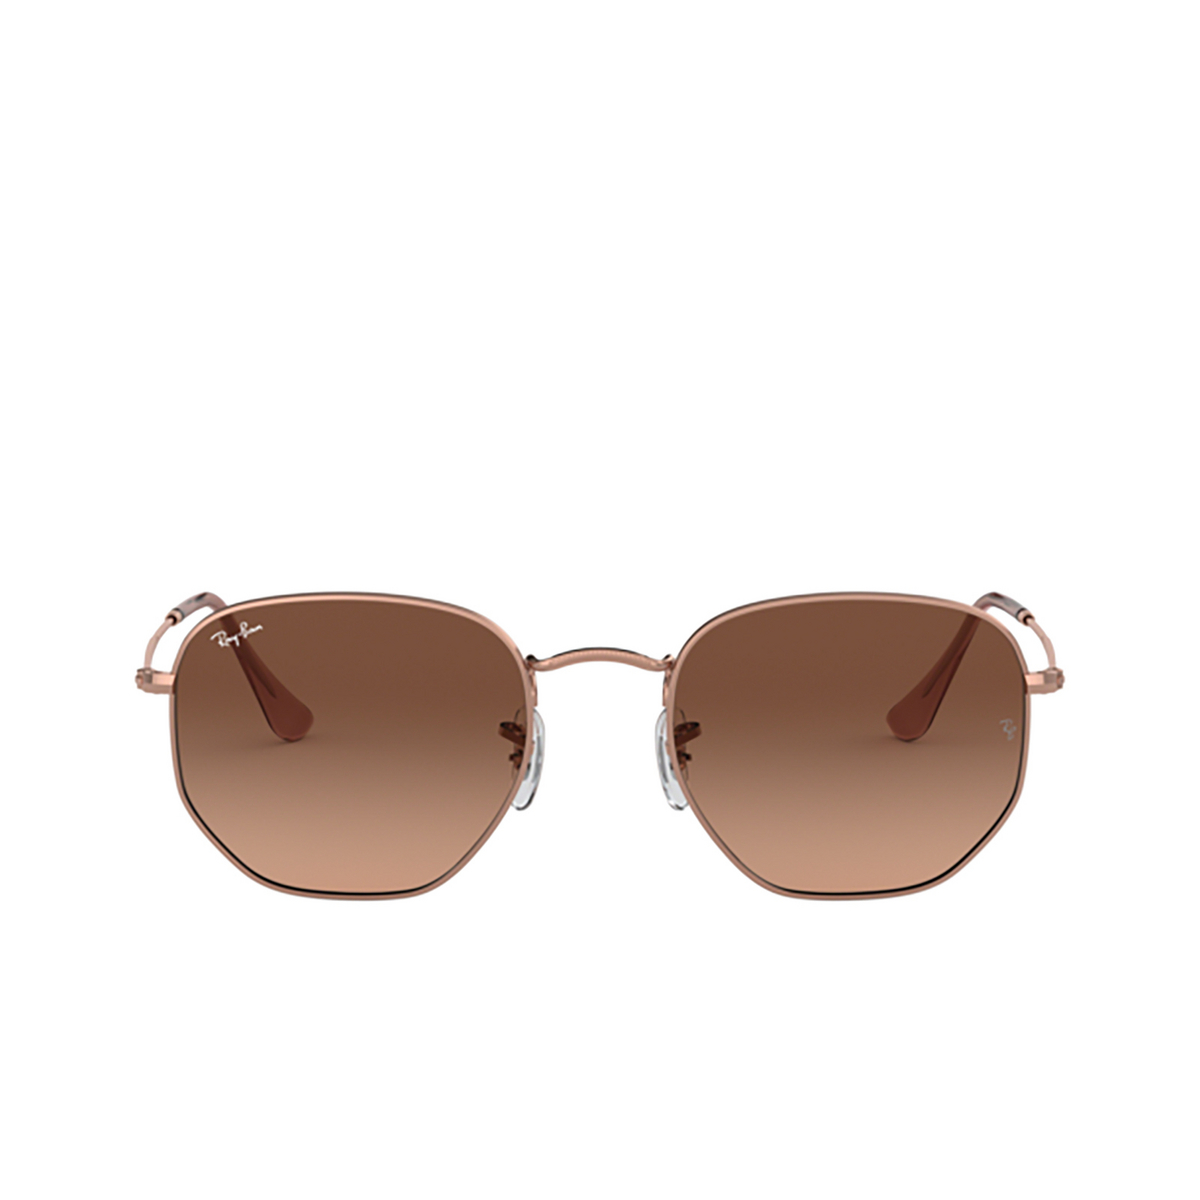 Ray-Ban HEXAGONAL Sunglasses 9069A5 COPPER - front view